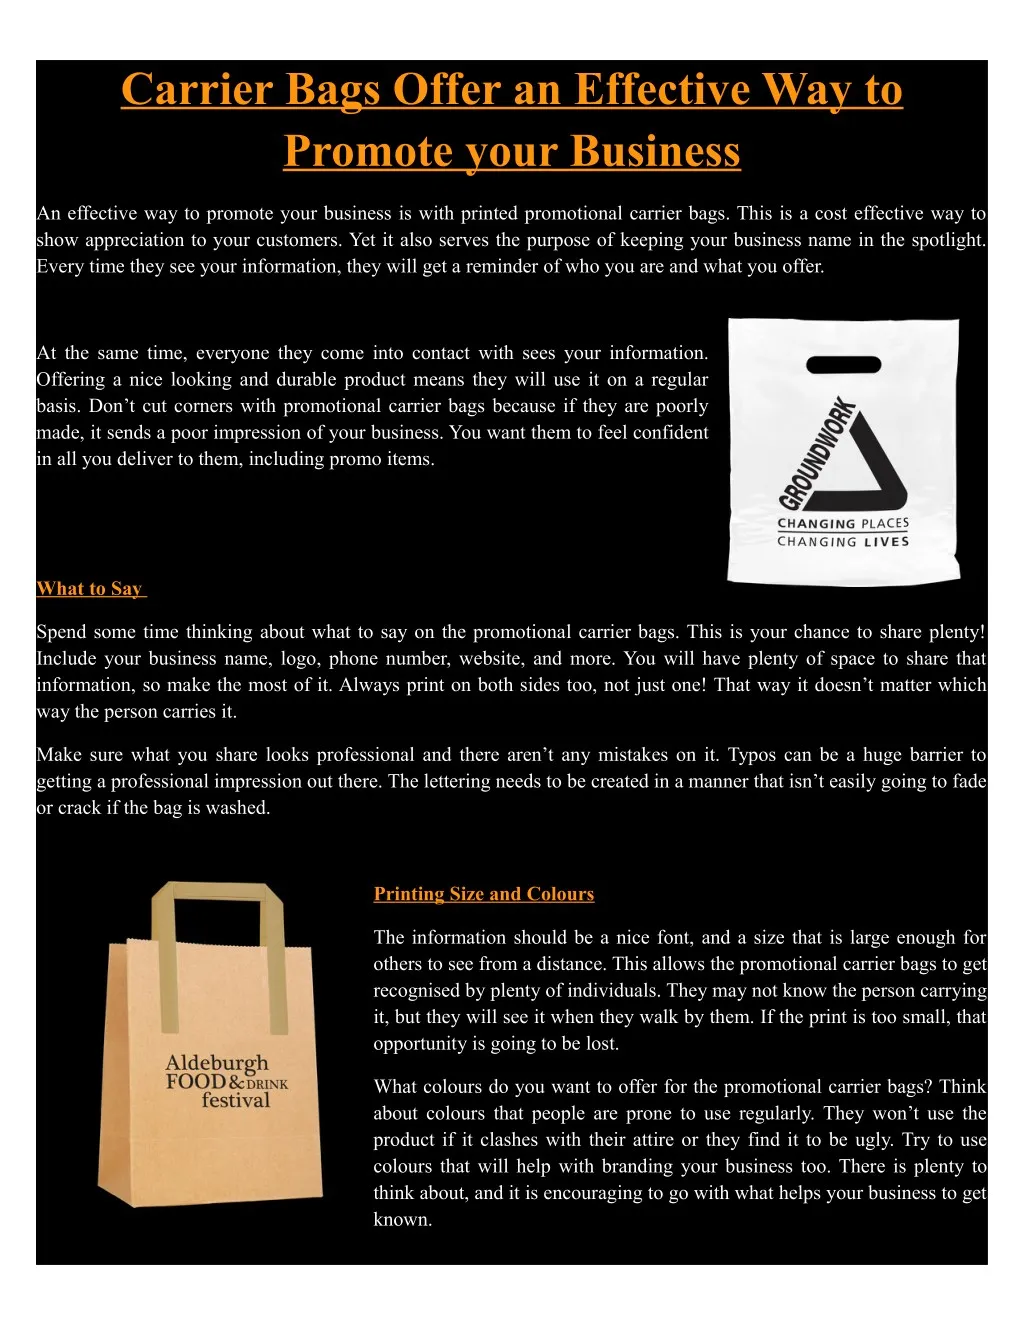 carrier bags offer an effective way to promote